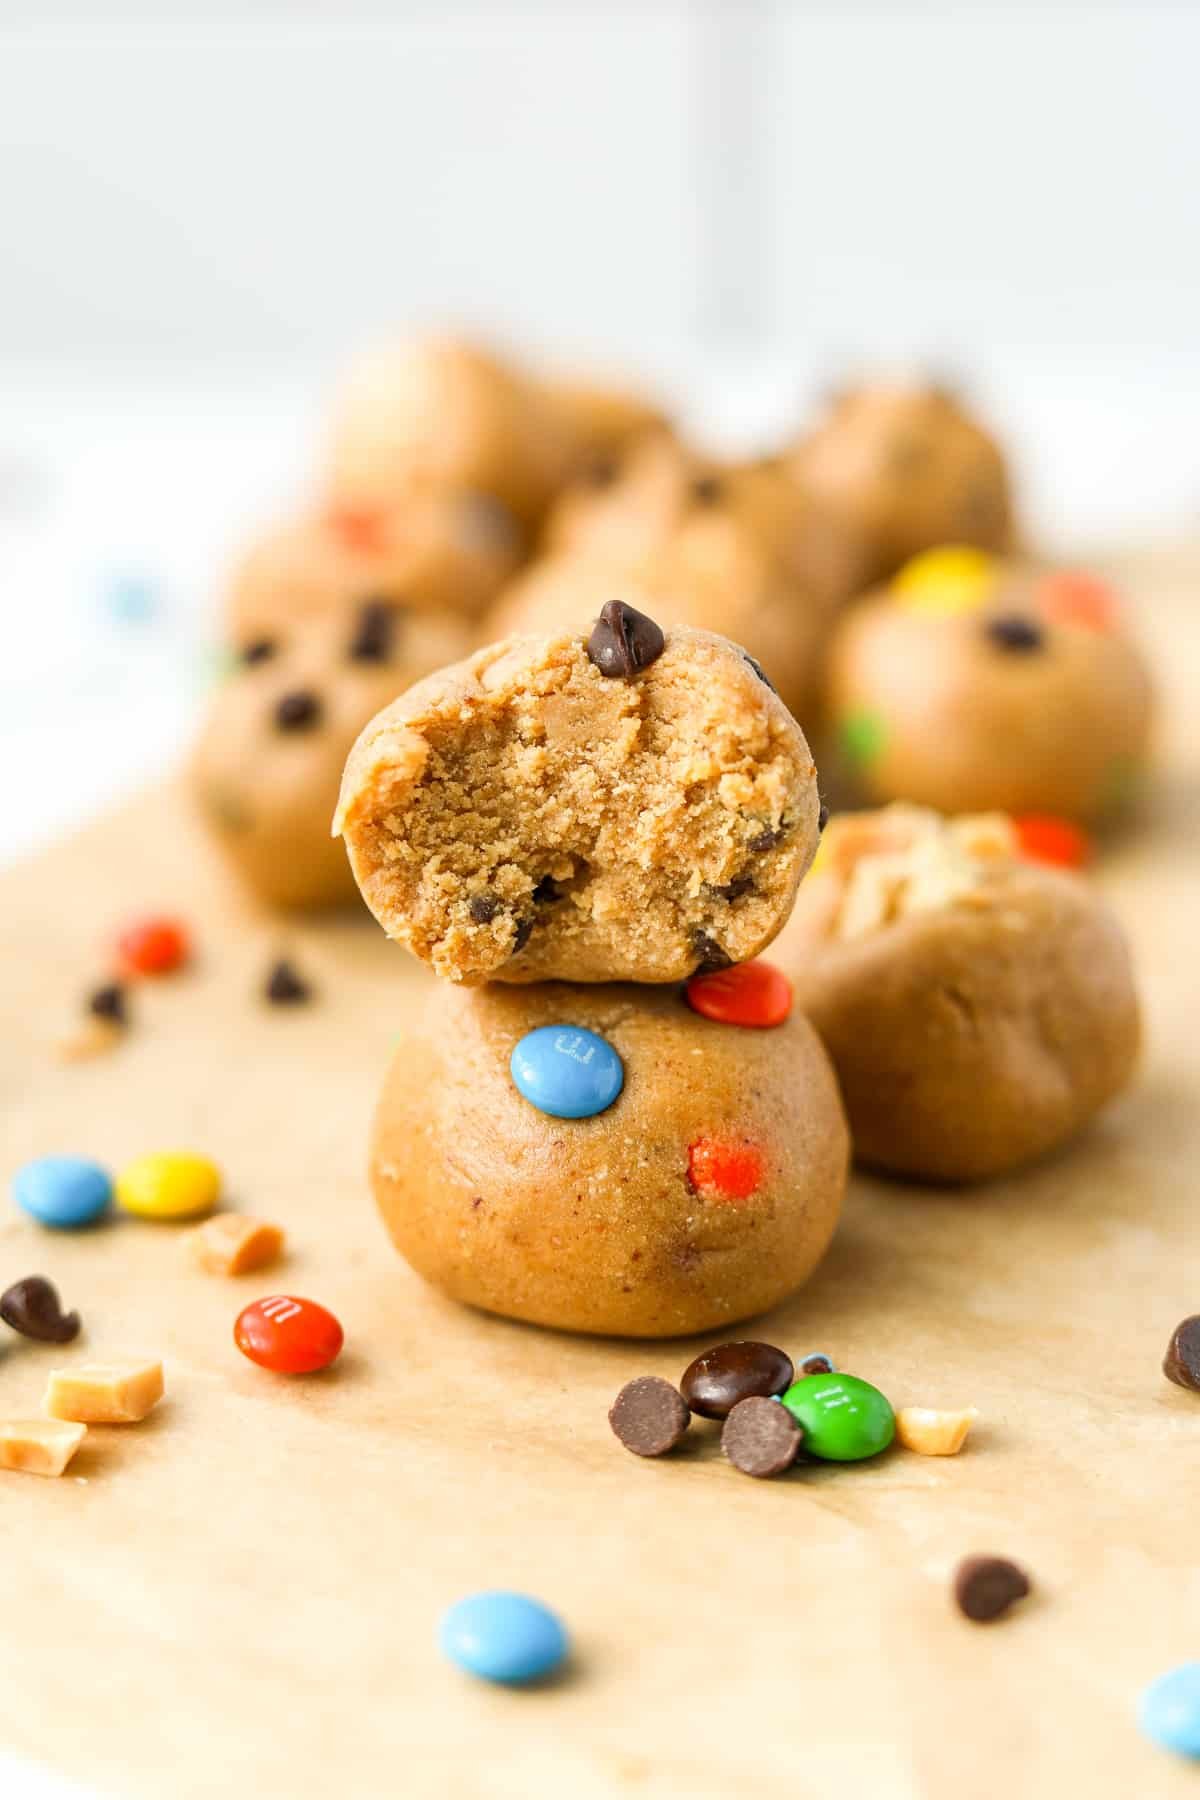 A stack of two protein balls with m&m's and chocolate chips.